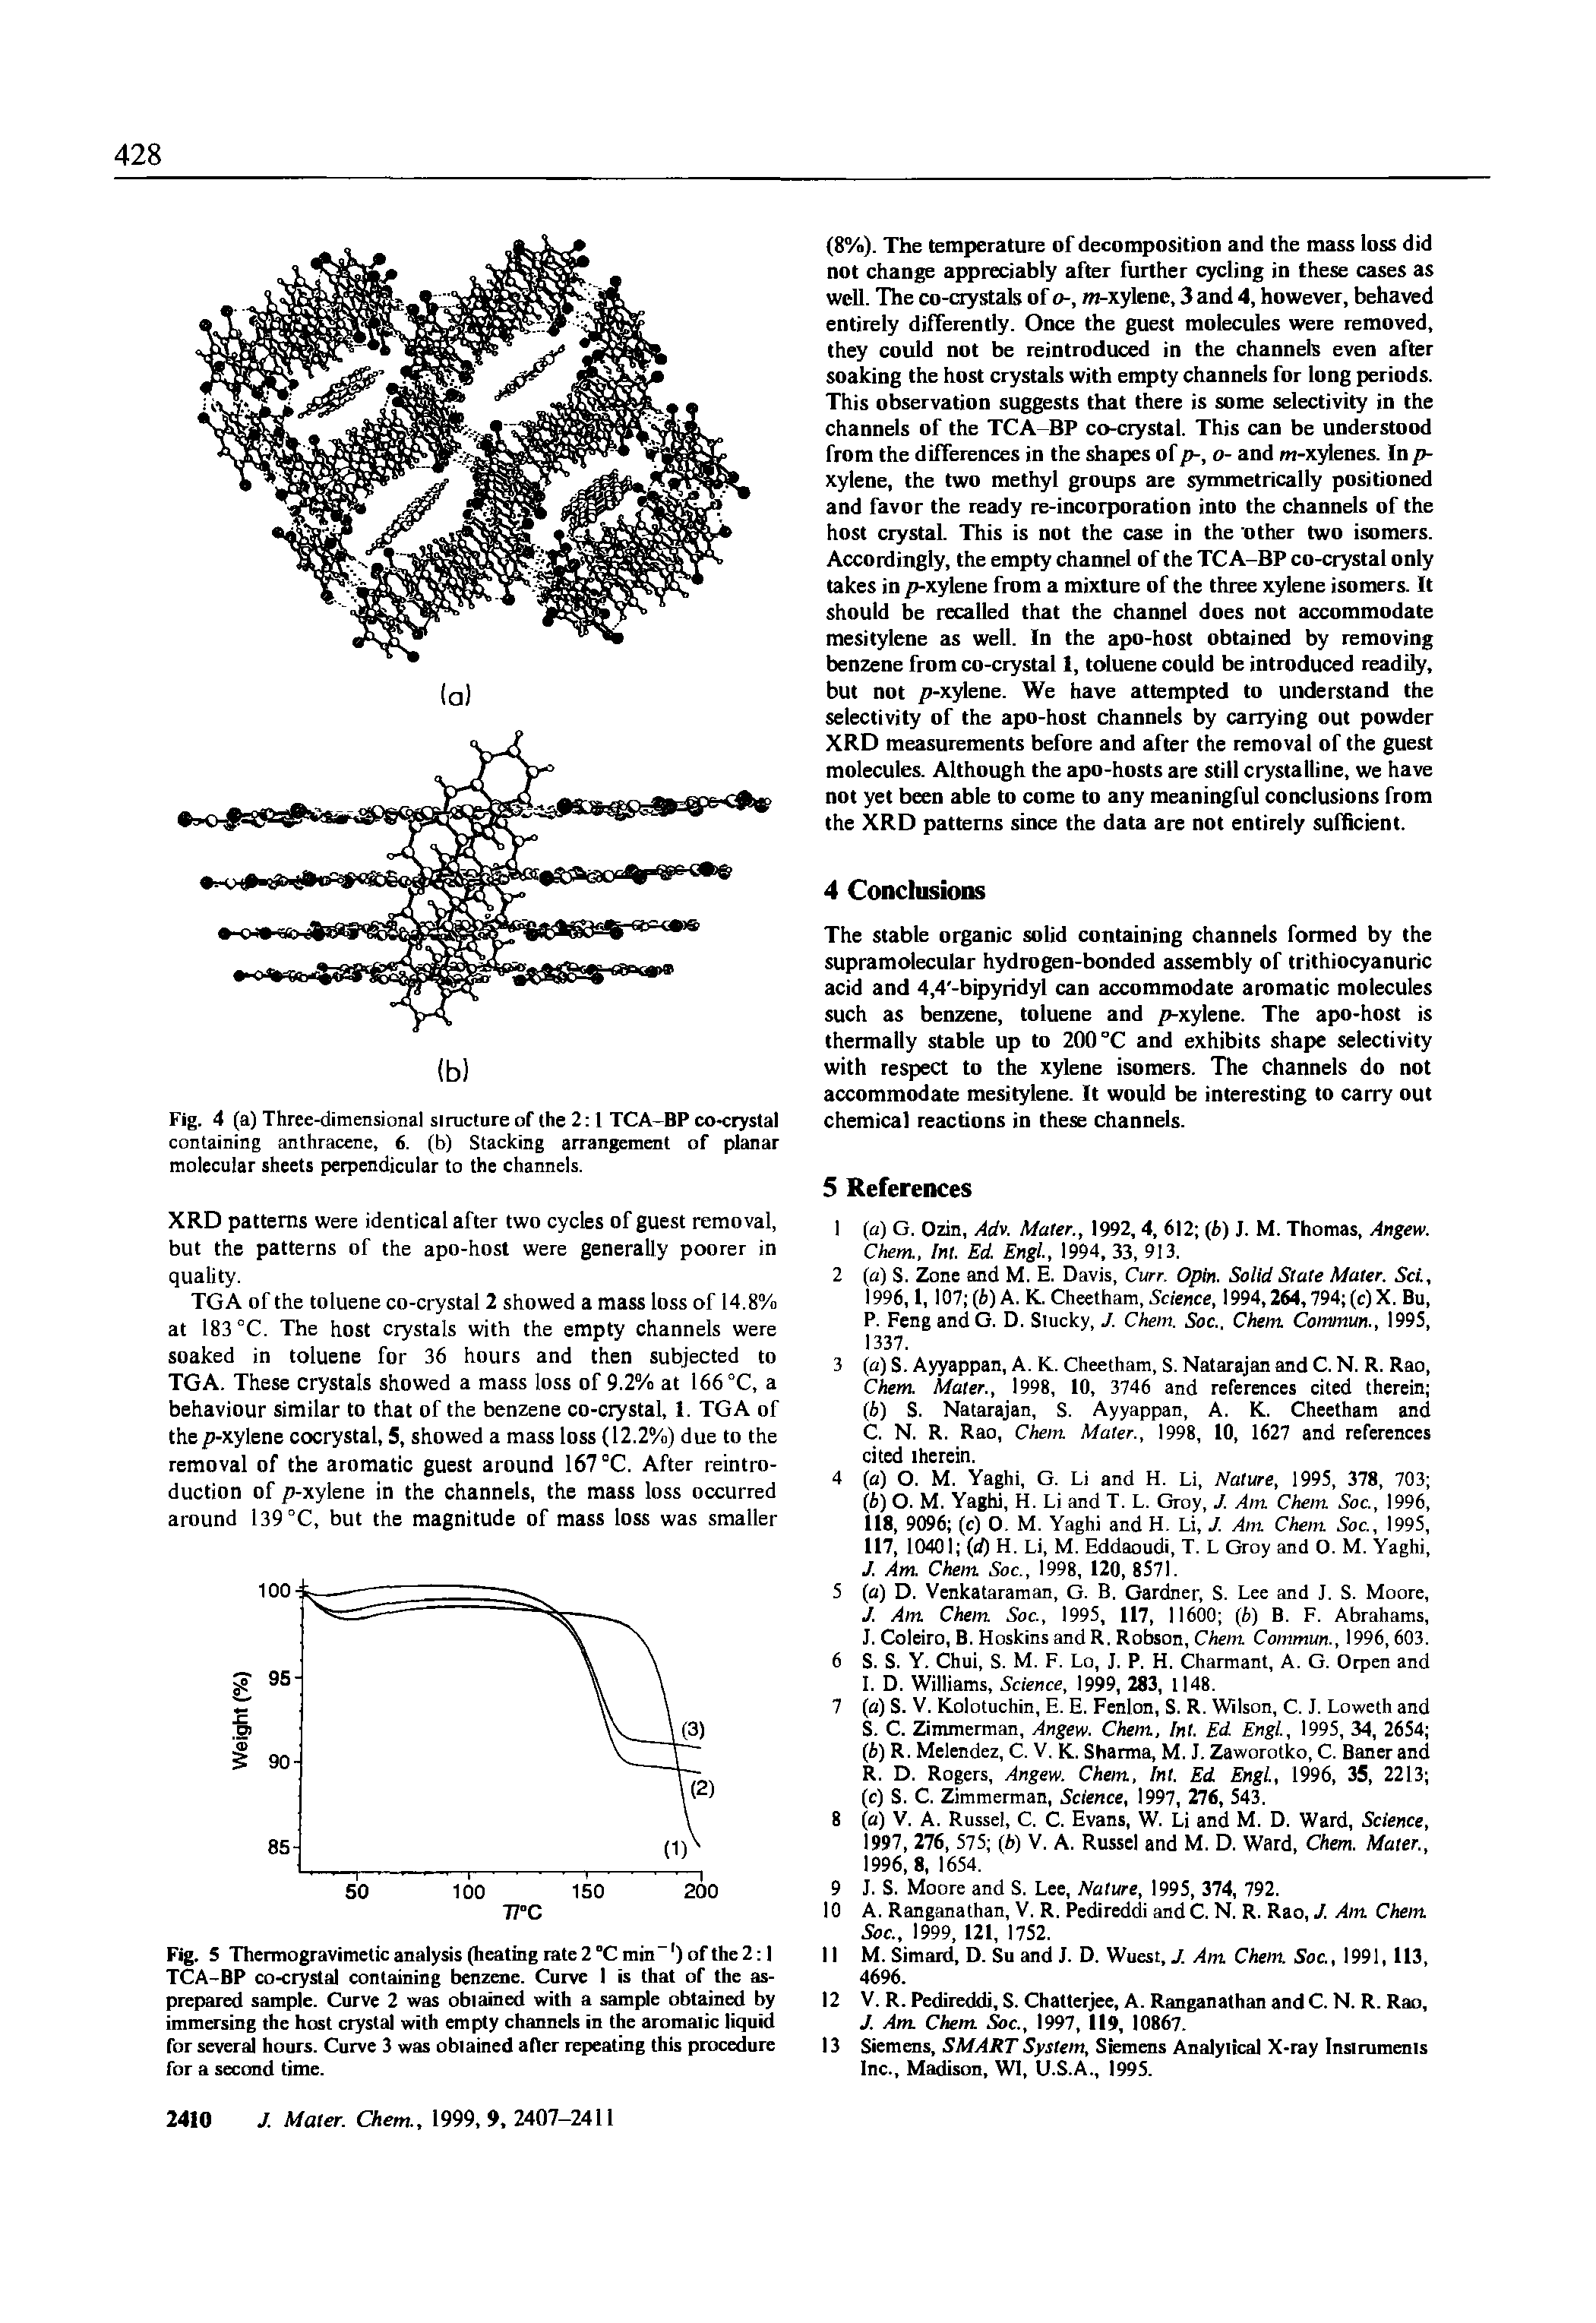 Fig. 5 Thermogravimetic analysis (heating rate 2 °C min - ) of the 2 1 TCA-BP co-crystal containing benzene. Curve I is that of the as-prepared sample. Curve 2 was obtained with a sample obtained by immersing the host crystal with empty channels in the aromatic liquid for several hours. Curve 3 was obtained after repeating this procedure for a second time.